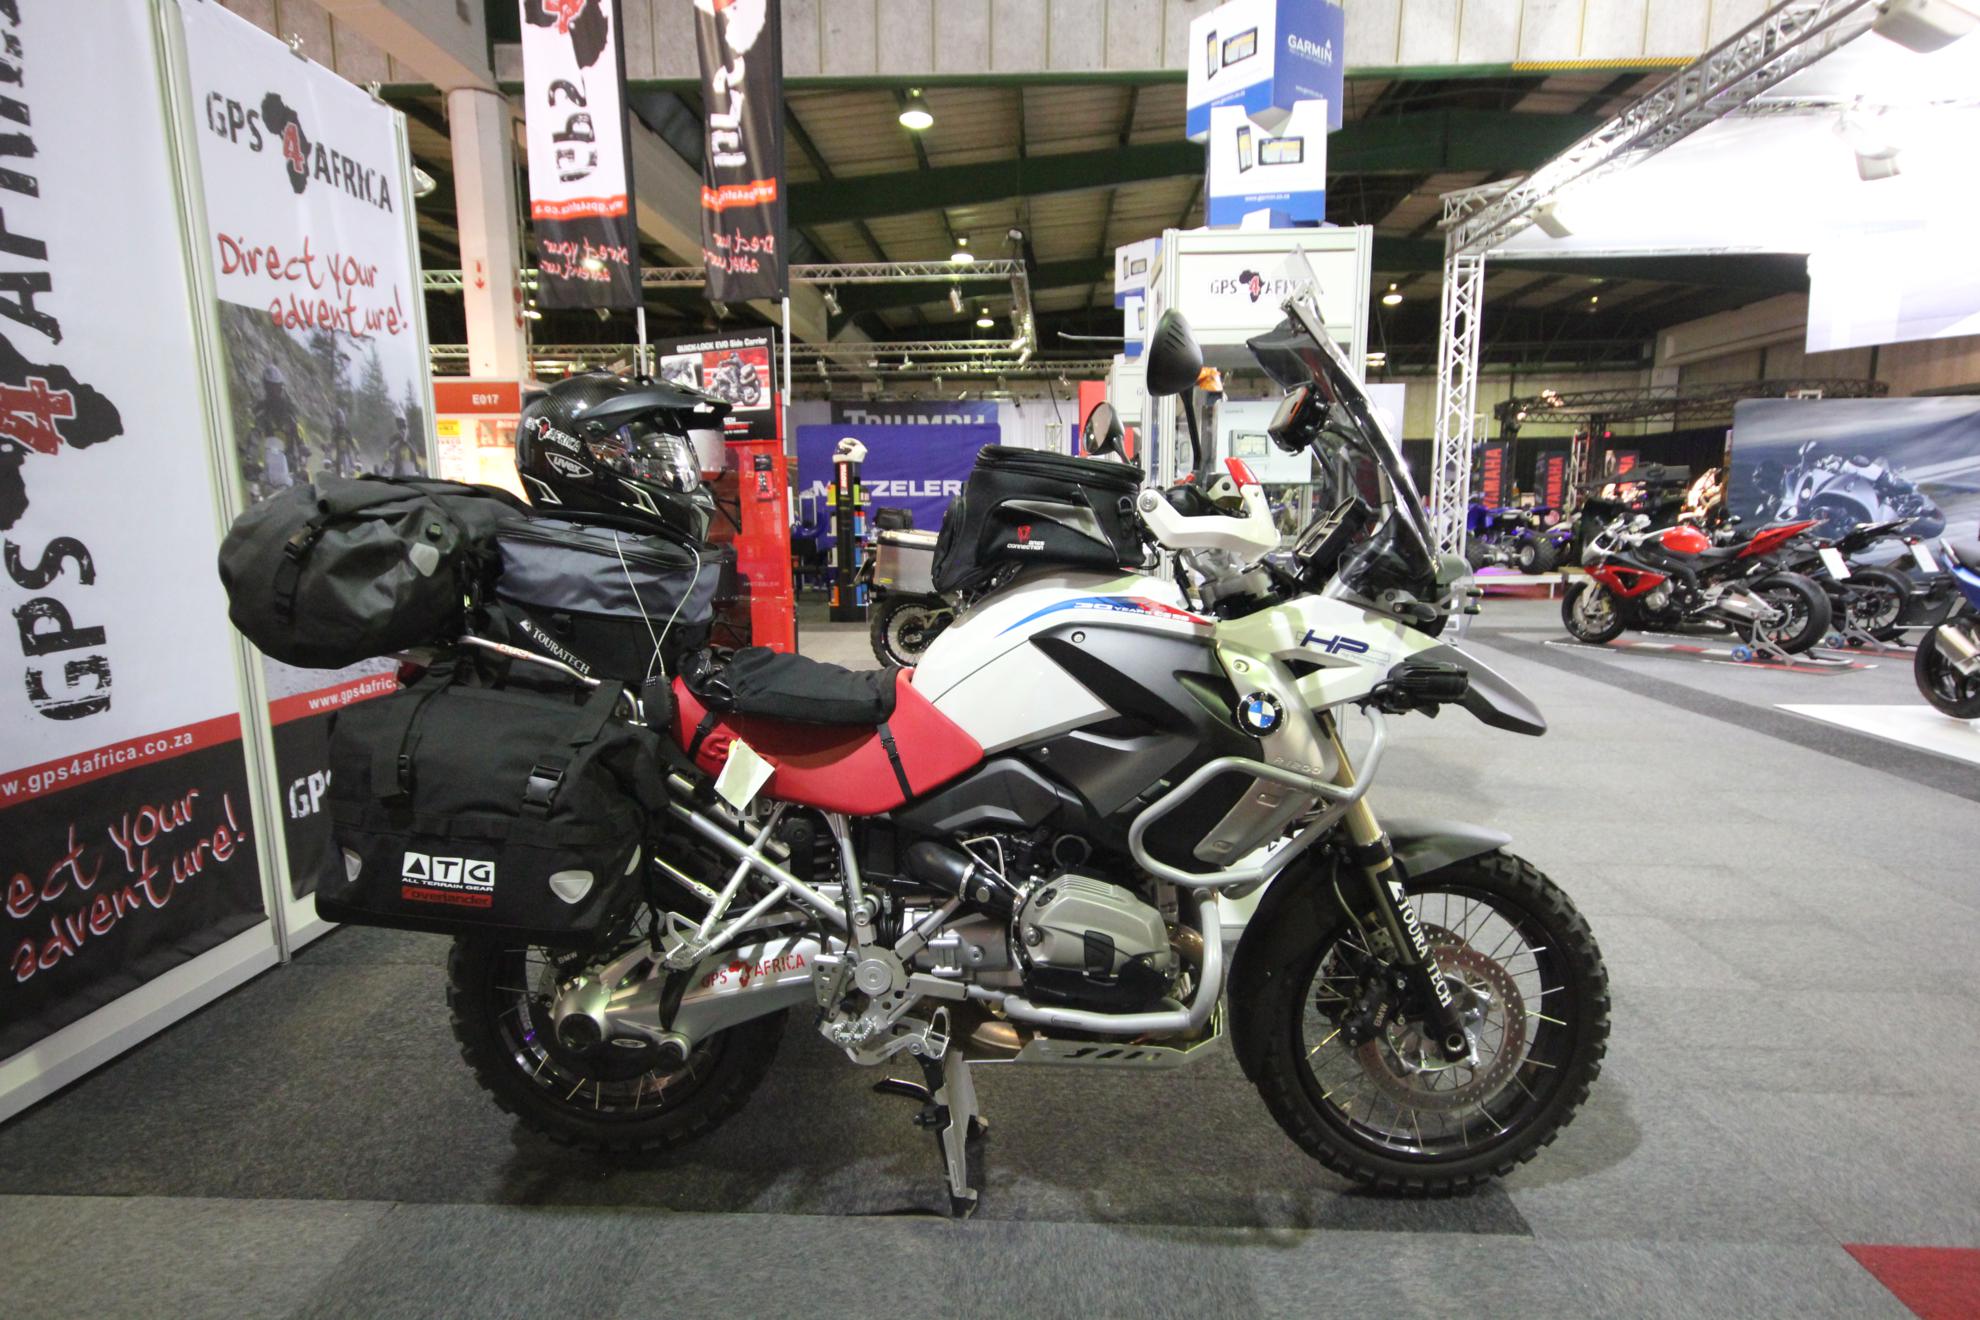 BMW Johannesburg Motorcycle Show Images